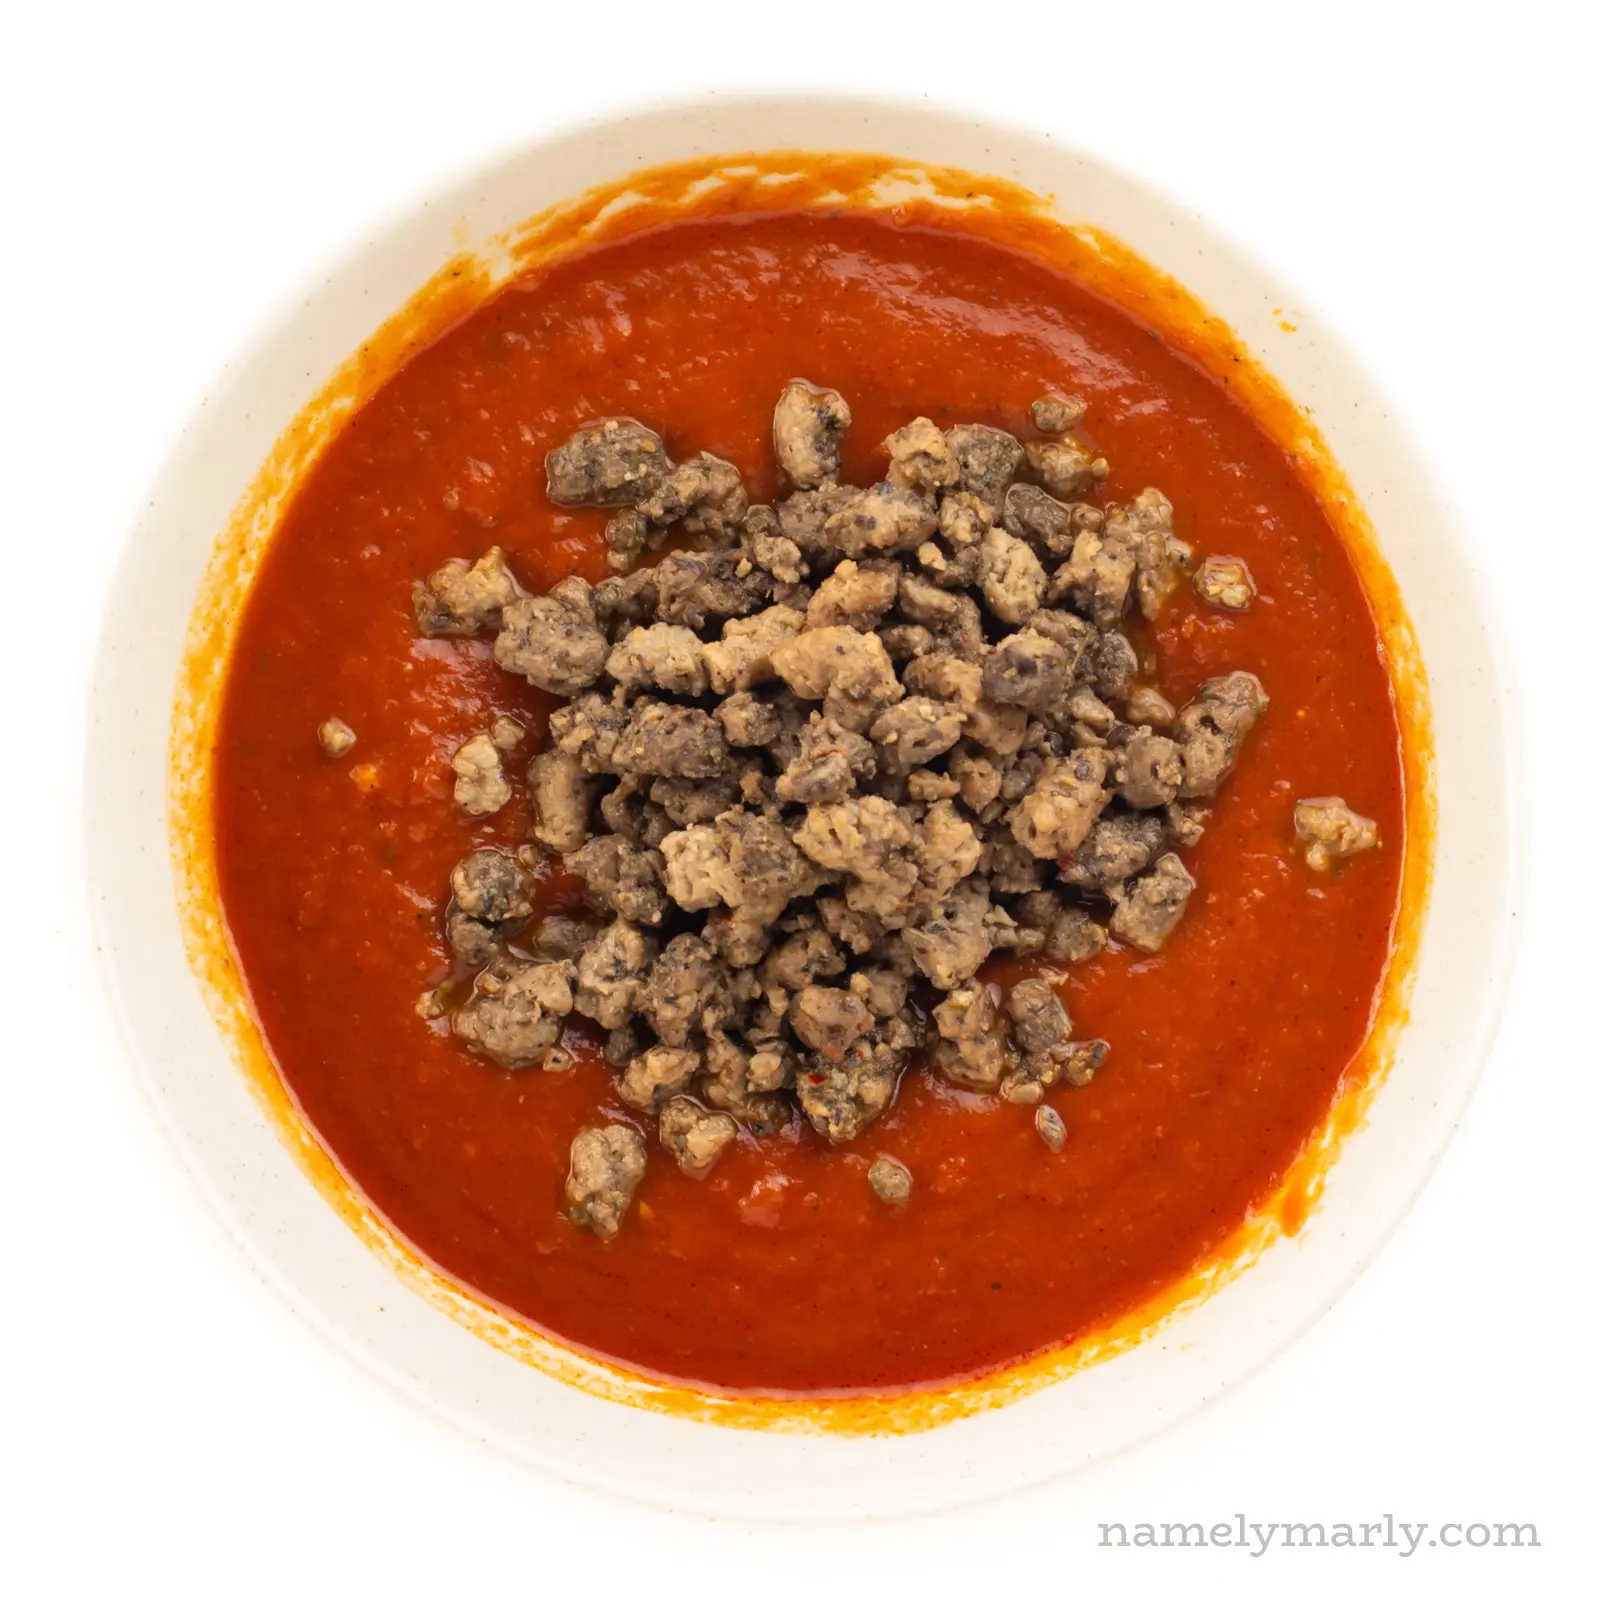 Marinara sauce in a bowl with veggie crumbles added.